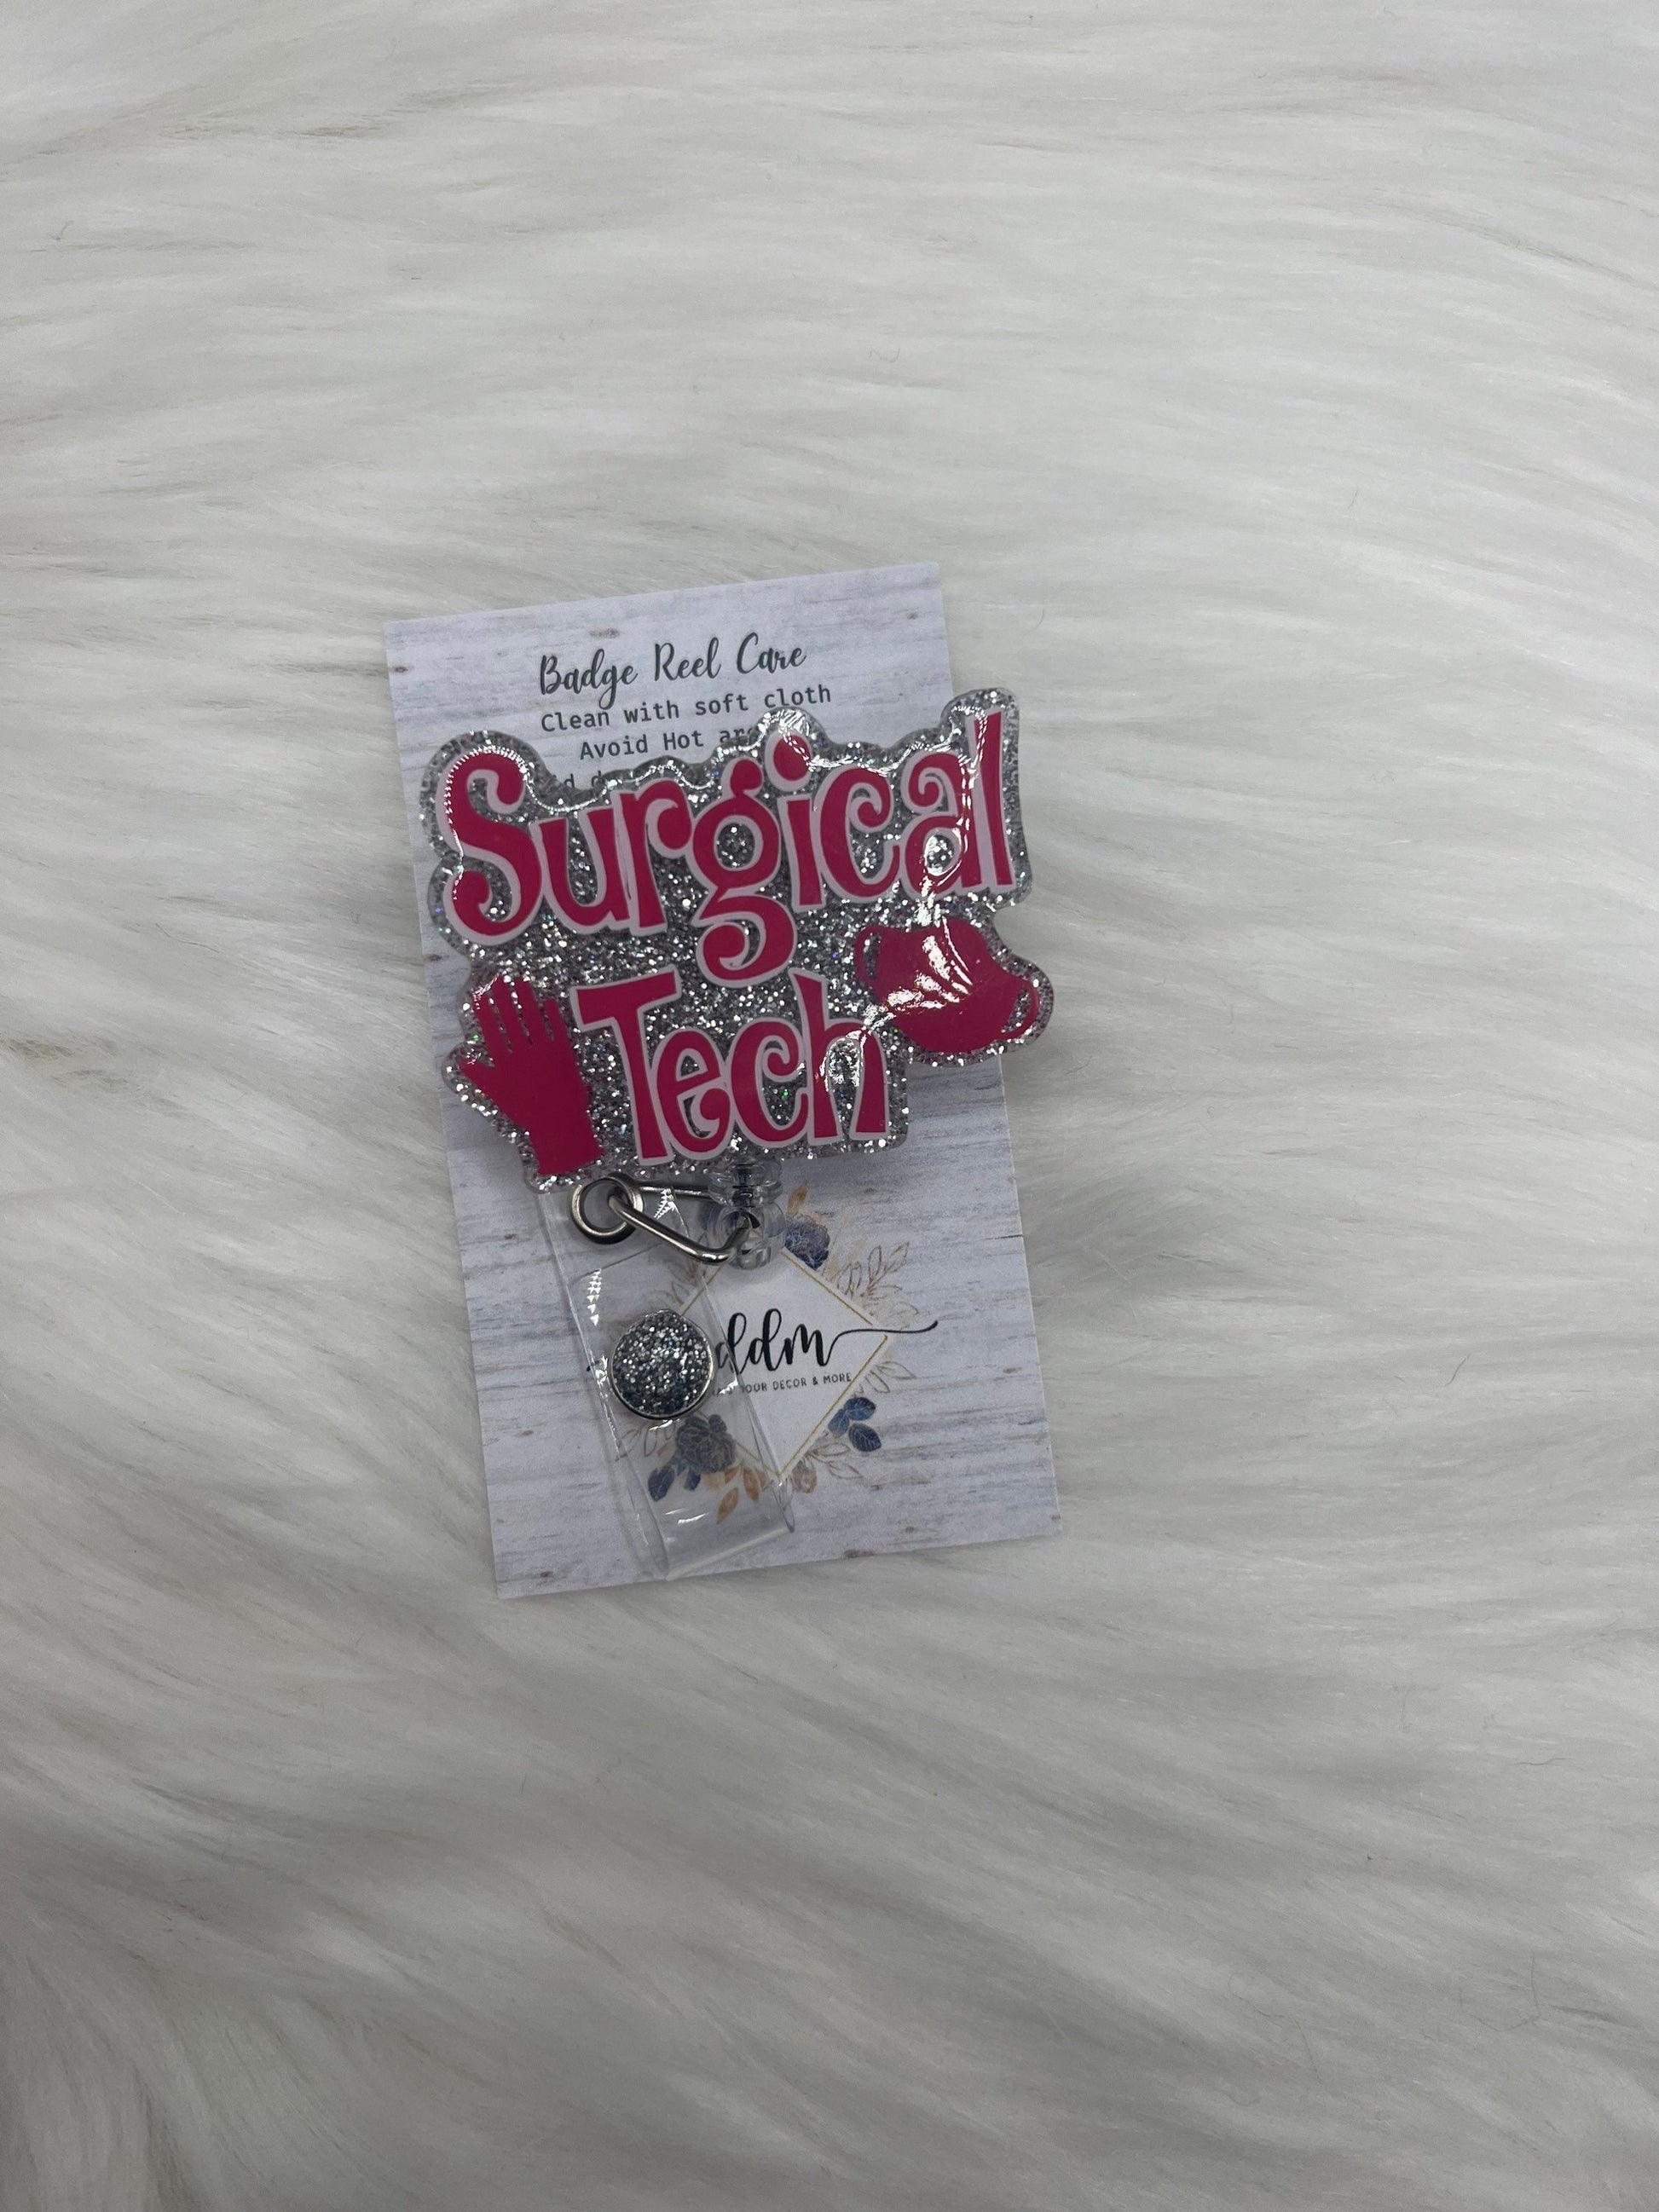 Surgical Tech Badge Reel-Medical-Badge Reel-Badge Holder-Made to Order-Custom-Customizable-ST-Medical Field-personalized gifts